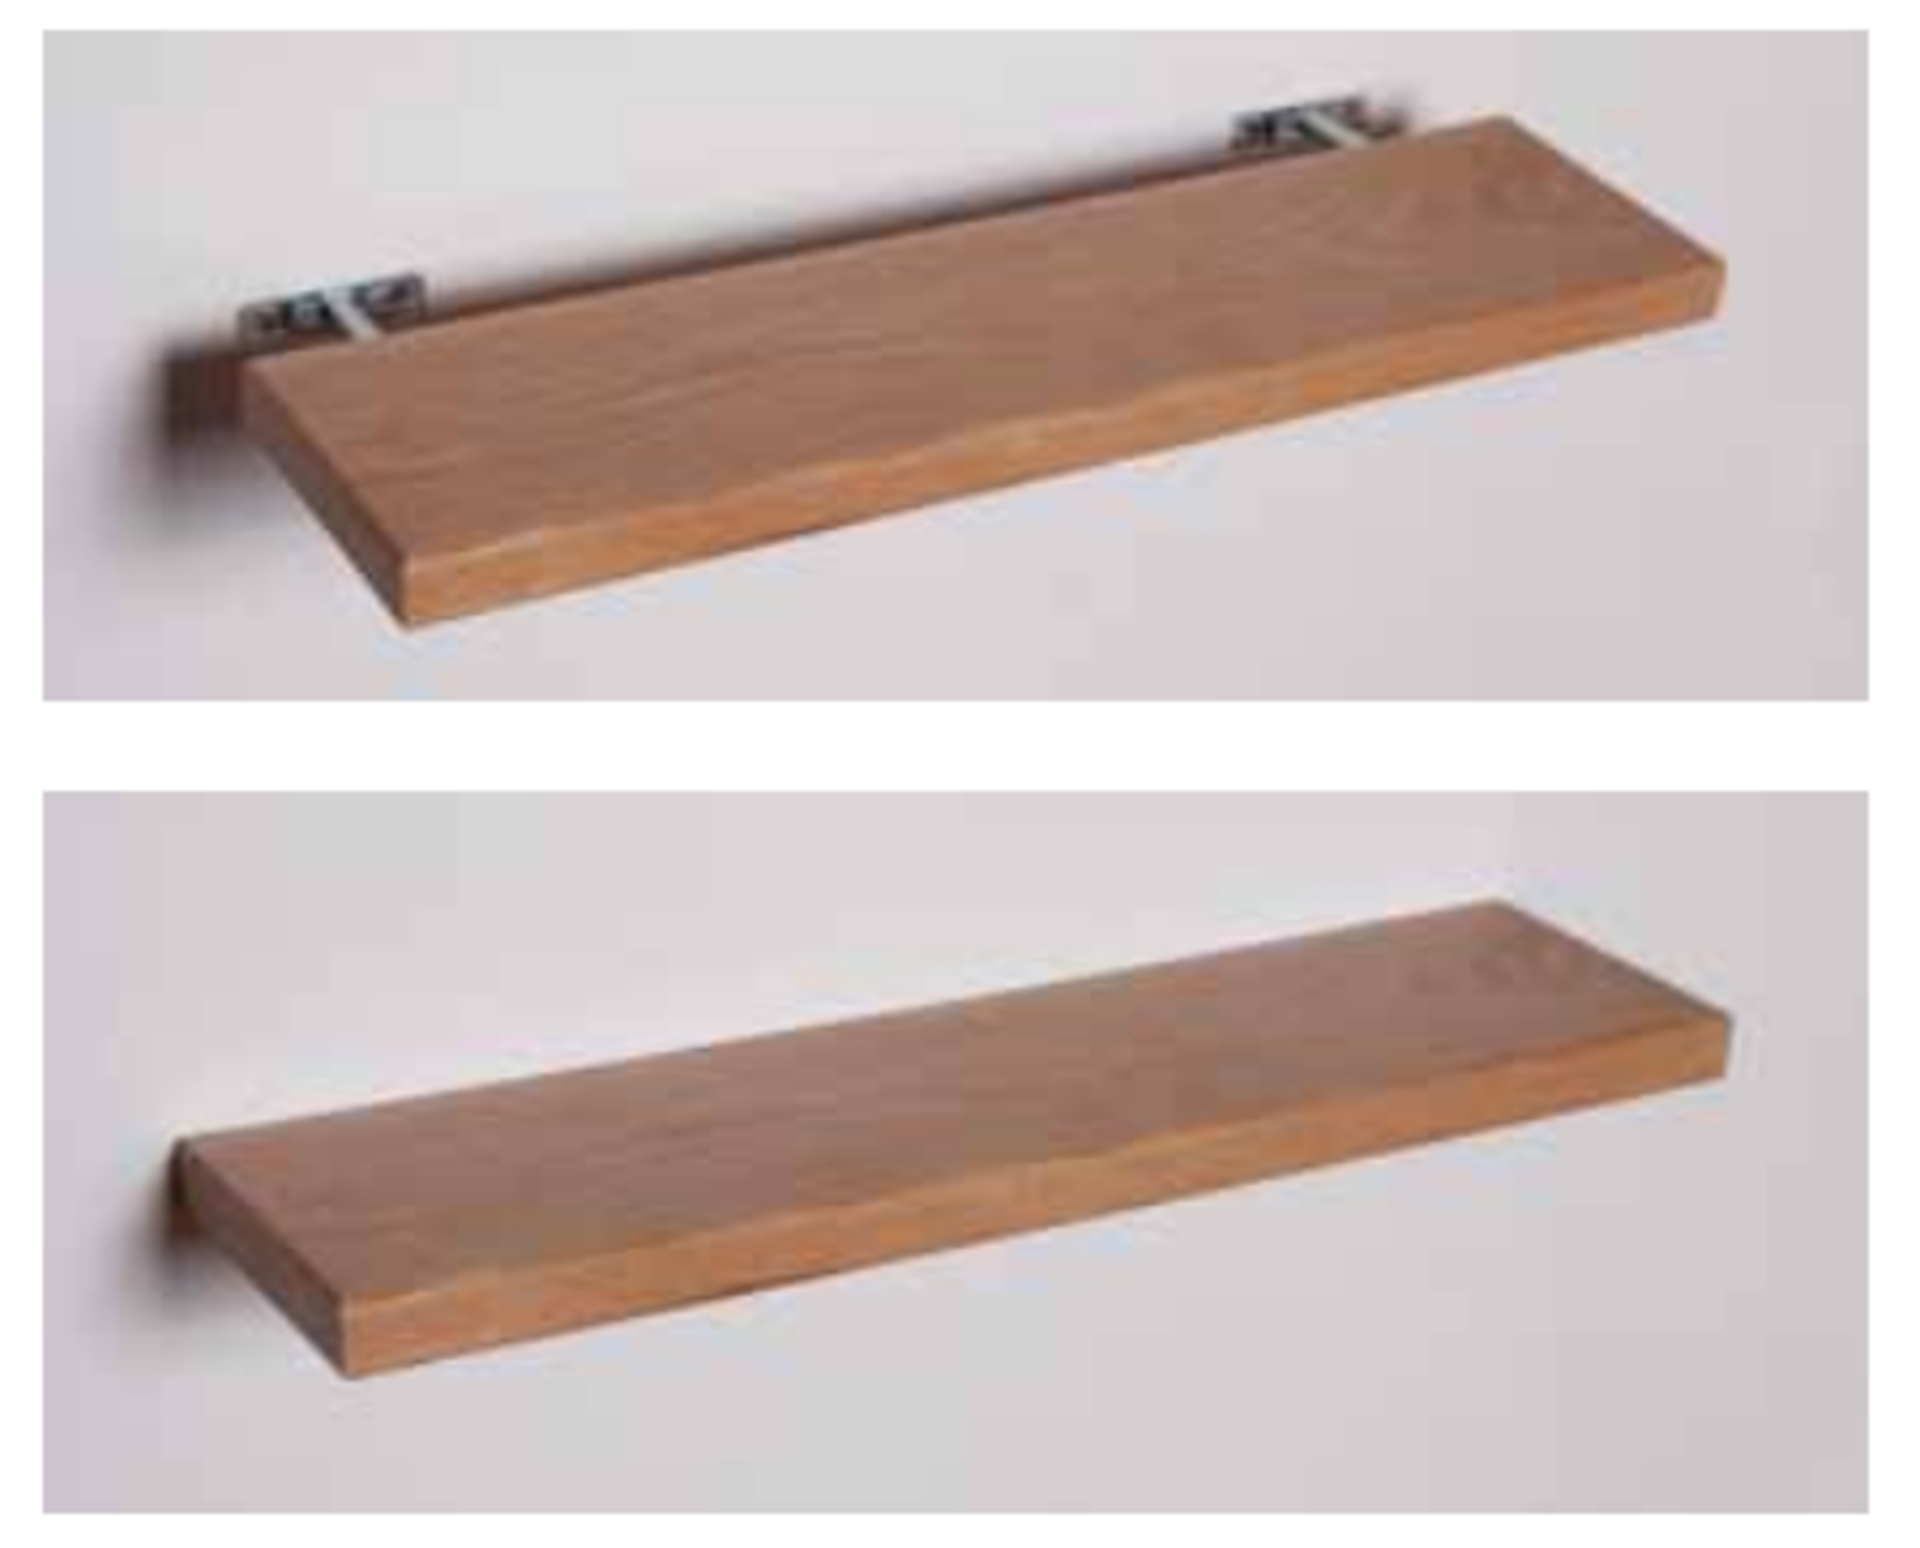 1 x Stonearth Bathroom Storage Shelf With Concealed Brackets - American Solid Walnut - Size: 750mm - Image 2 of 16